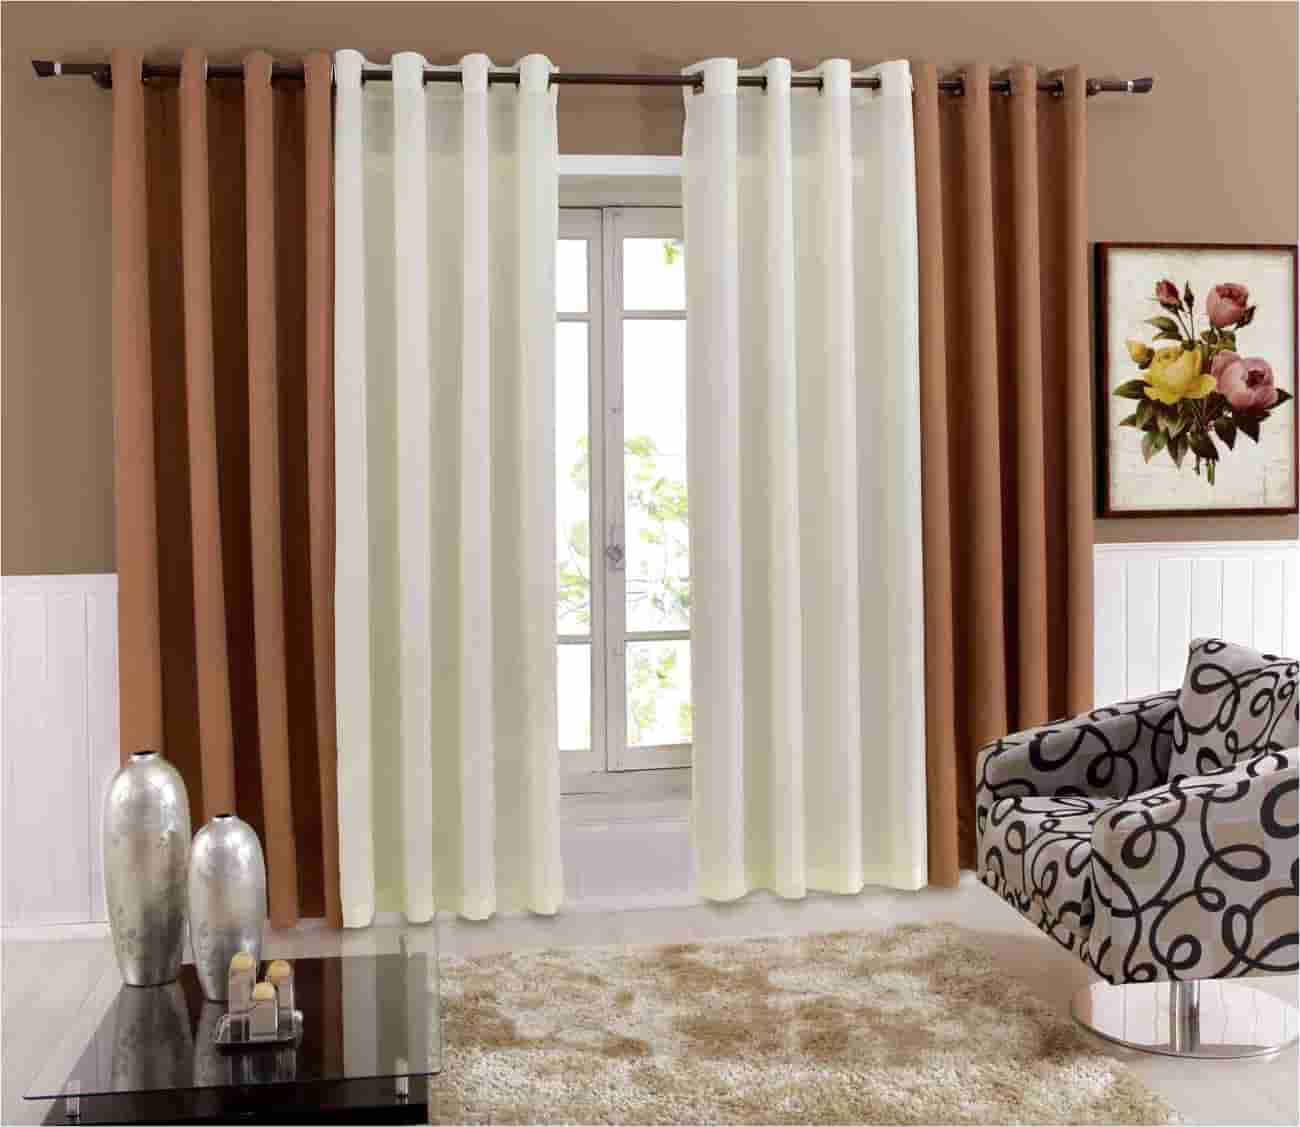 Blackout curtains come in many different colors